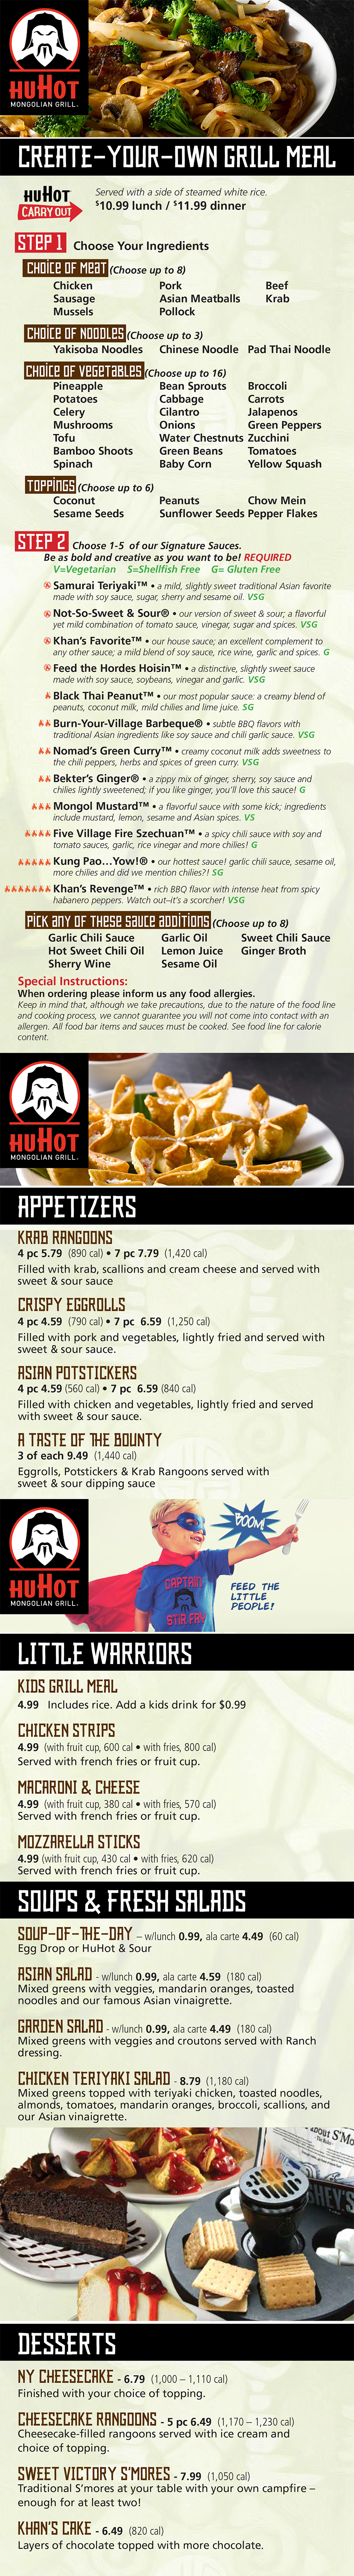 HuHot Mongolian Grill Menu - Lincoln Nebraska 
  APPETIZERS
KRAB RANGOONS 4 pc 5.79 (890 cal) • 7 pc 7.79 (1,420 cal)
Filled with krab, scallions and cream cheese and served with
sweet & sour sauce.
CRISPY EGGROLLS 4 pc 4.59 (790 cal) • 7 pc 6.59 (1,250 cal)
Filled with pork and vegetables, lightly fried and served with
sweet & sour sauce.
ASIAN POTSTICKERS 4 pc 4.59 (560 cal) • 7 pc 6.59 (840 cal)
Filled with chicken and vegetables, lightly fried and served with
sweet & sour sauce.
A TASTE OF THE BOUNTY 3 of each 9.49 (1,440 cal)
Eggrolls, Potstickers & Krab Rangoons served with
sweet & sour dipping sauce.
DESSERTS
NY CHEESECAKE 6.79 (1,000 – 1,110 cal)
Finished with your choice of topping.
CHEESECAKE RANGOONS 5 pc 6.49 (1,170 – 1,230 cal)
Cheesecake-filled rangoons served with ice cream and
choice of topping.
SWEET VICTORY S’MORES 7.99 (1,050 cal)
Traditional S’mores at your table with your own campfire – enough for
at least two!
KHAN’S CAKE 6.49 (820 cal)
Layers of chocolate topped with more chocolate.
CREATE-YOUR-OWN GRILL MEAL
Served with custom white rice blend to share (1/4 C=60 cal).
Enjoy the all-you-can-eat grill meal in-restaurant only. Leftovers cannot
be packaged to take home.
WEEKDAY LUNCH 9.99
WEEKEND AND HOLIDAY LUNCH (expanded food lIne) 11.99
DINNER (expanded food lIne, includes soup or salad) 14.49
One trip only–includes side of steamed rice.
10.99 lunch / 11.99 dinner
See Host for carryout bowl. Not available for dine-in.
Please inform your server and cook of any food allergies. Keep in mind that, although
we take precautions, due to the nature of our food line and cooking process, we cannot
guarantee you will not come into contact with an allergen. All food bar items and sauces
must be cooked. See food line for calorie content.
LITTLE WARRIORS
KIDS GRILL MEAL Includes rice. Add a kids drink for $0.99
(ages 3 & under) FREE • (ages 4–10) 4.99
CHICKEN STRIPS 4.99 (with fruit cup, 600 cal • with fries, 800 cal)
Served with french fries or fruit cup.
MACARONI & CHEESE 4.99 (with fruit cup, 380 cal • with fries, 570 cal)
Served with french fries or fruit cup.
MOZZARELLA STICKS 4.99 (with fruit cup, 430 cal • with fries, 620 cal)
Served with french fries or fruit cup.
SOUPS & FRESH SALADS
SOUP-OF-THE-DAY
Egg Drop or HuHot & Sour – w/lunch 0.99, ala carte 4.49 (60 cal)
ASIAN SALAD w/lunch 0.99, ala carte 4.59 (180 cal)
Mixed greens with veggies, mandarin oranges, toasted noodles and our
famous Asian vinaigrette.
GARDEN SALAD w/lunch 0.99, ala carte 4.49 (180 cal)
Mixed greens with veggies and croutons served with Ranch dressing.
CHICKEN TERIYAKI SALAD 8.79 (1,180 cal)
Mixed greens topped with teriyaki chicken, toasted noodles, almonds,
tomatoes, mandarin oranges, broccoli, scallions, and our Asian vinaigrette.
1,200 to 1,400 calories a day is used for general advice for children ages
4-8 years and 1,400 to 2,000 calories a day for children ages 9-13, but
calorie needs vary.
HuHot Specialty Item